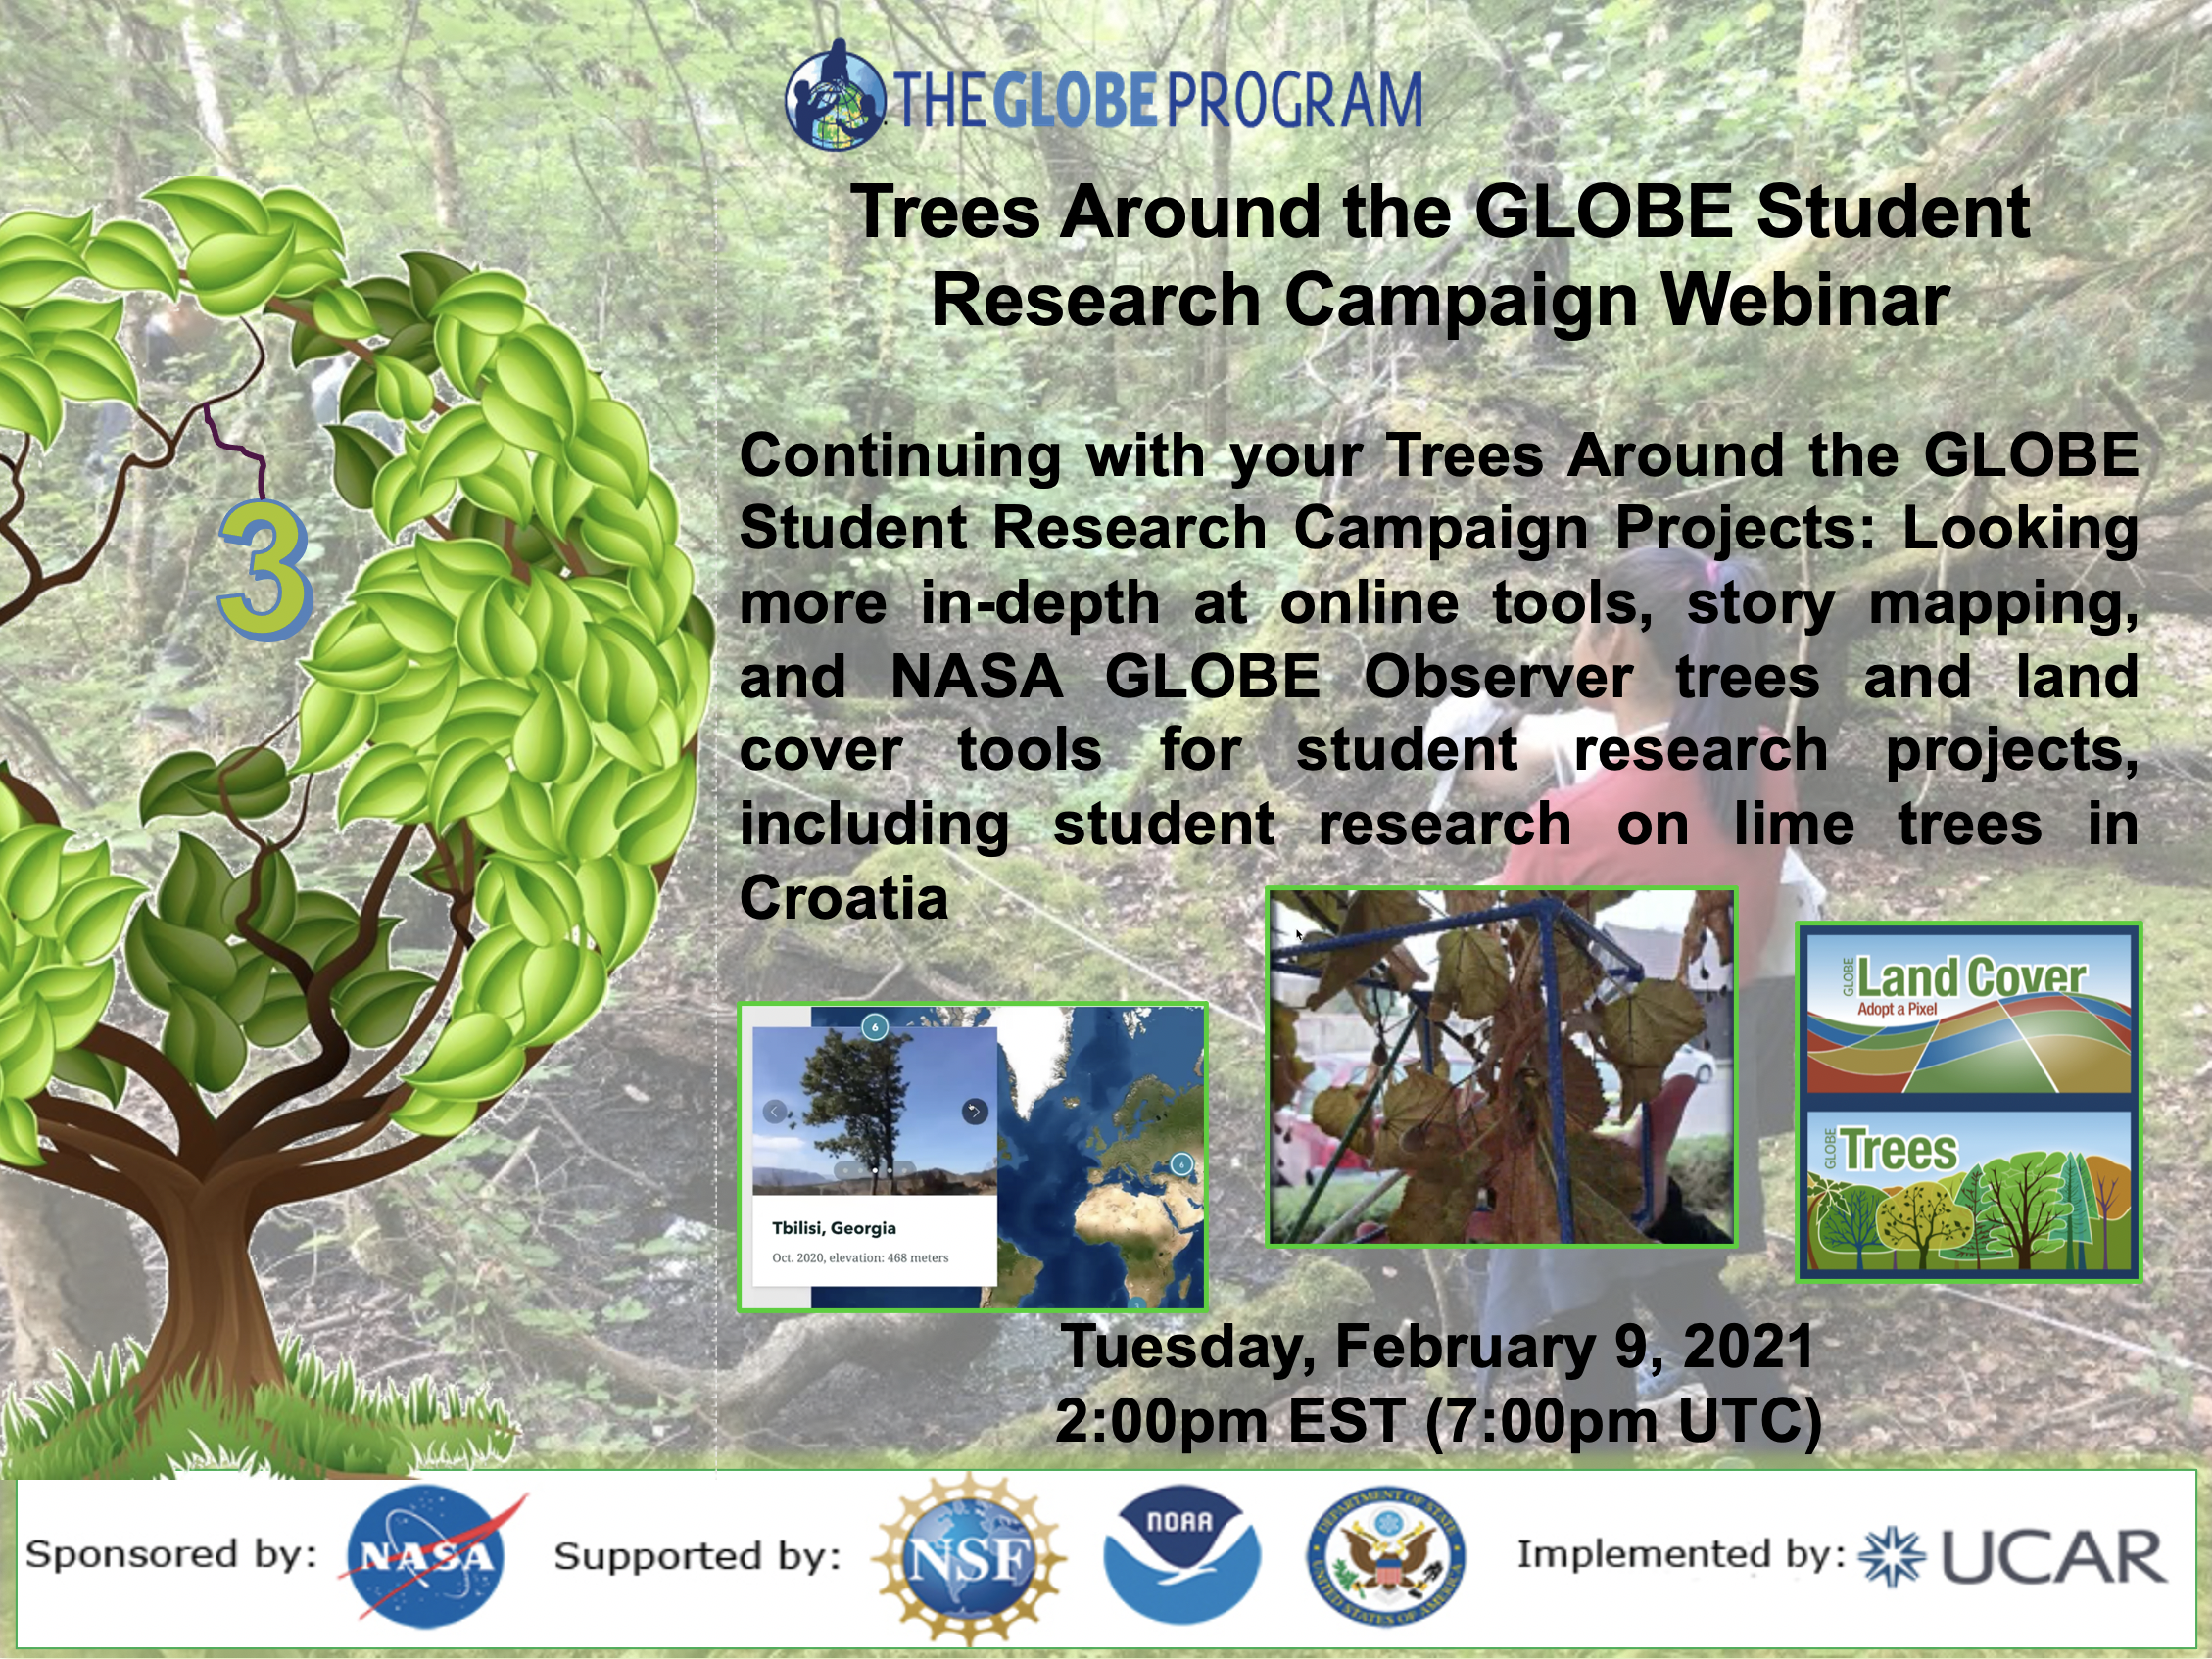 Trees Around the GLOBE Student Research Campaign 09 February Webinar shareable